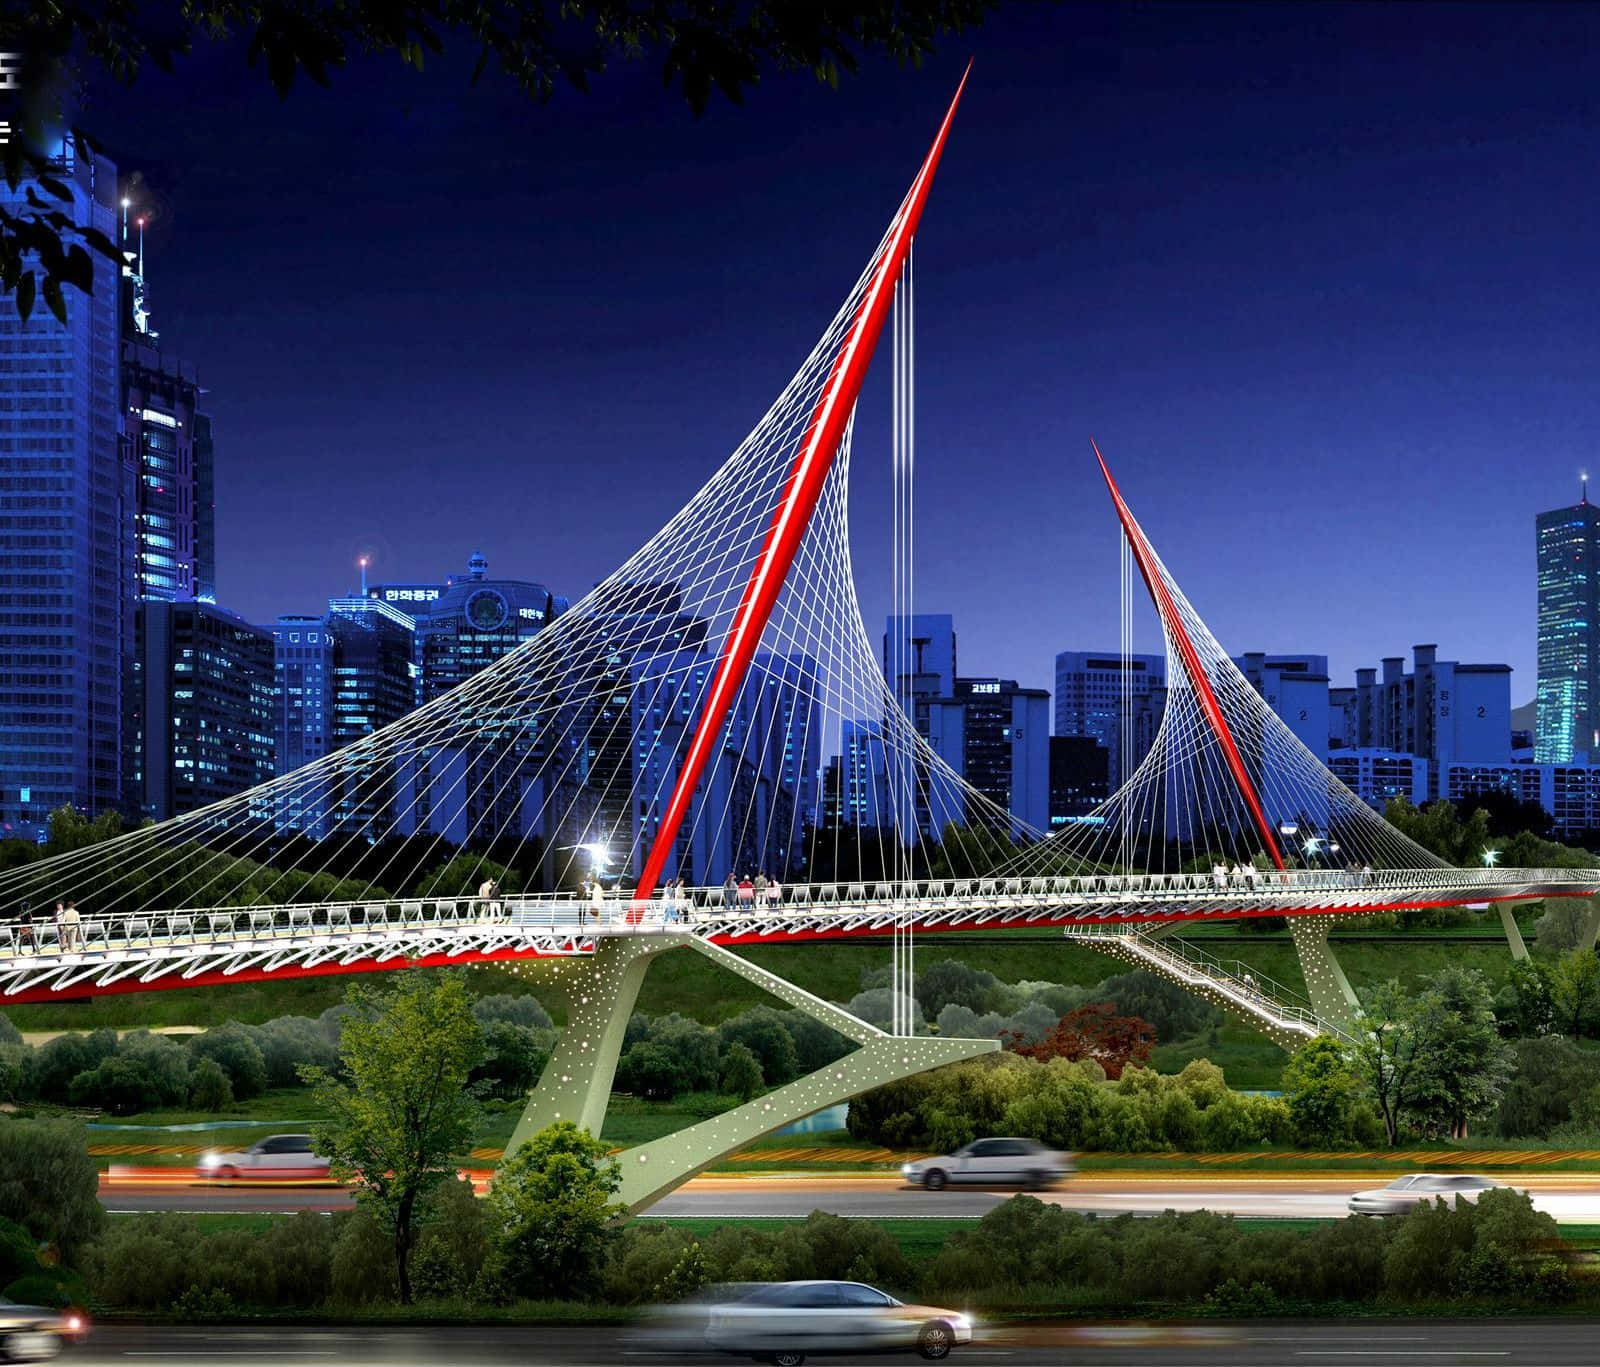 A Bridge With A Red And White Design